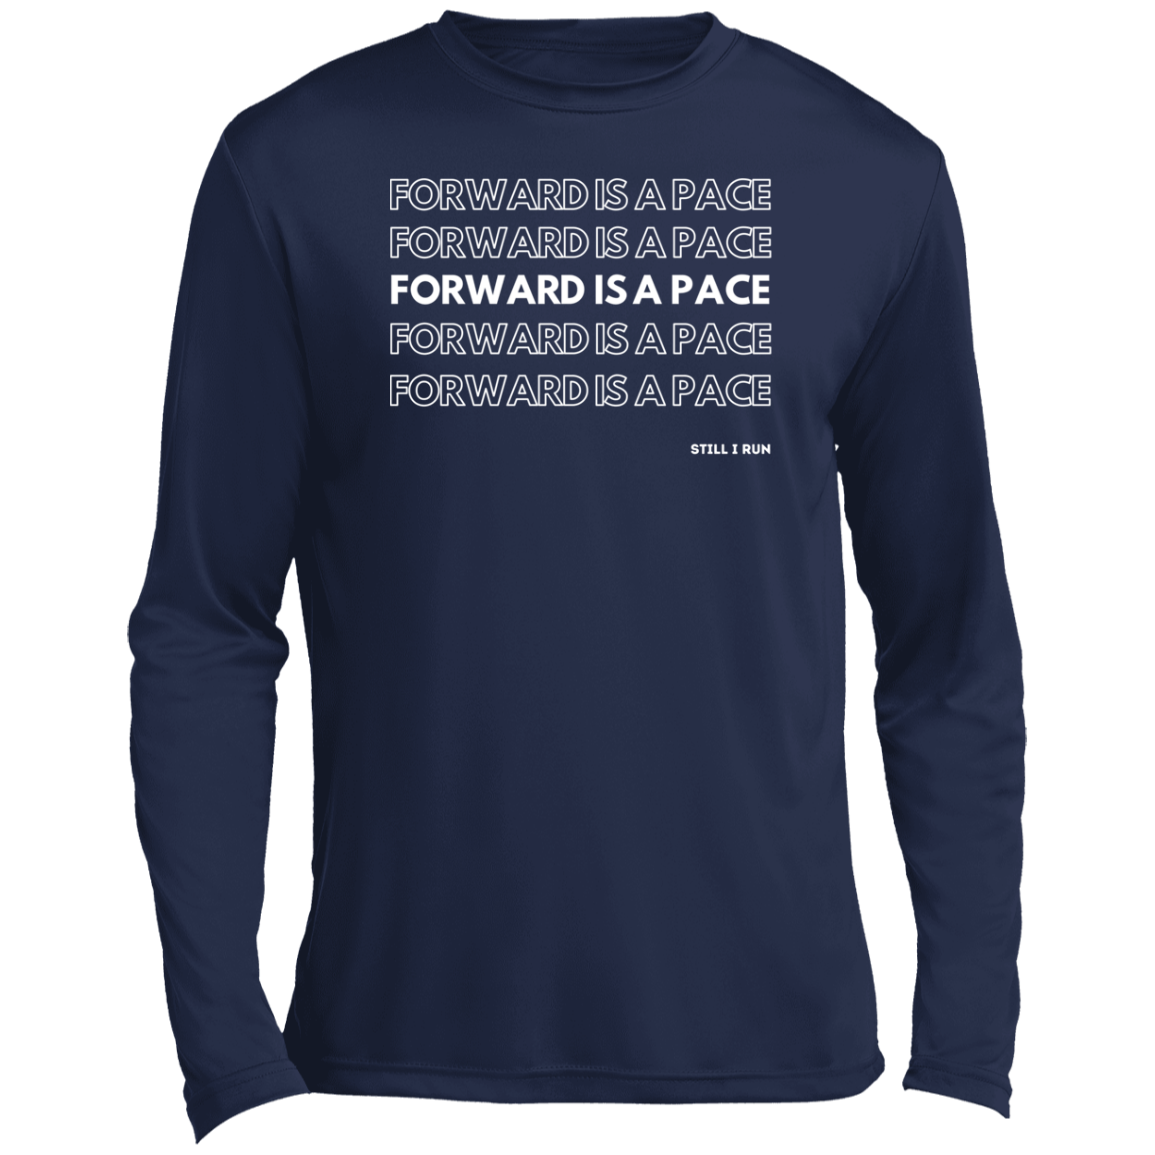 Forward is a Pace - Long Sleeve Performance Crewneck Tee